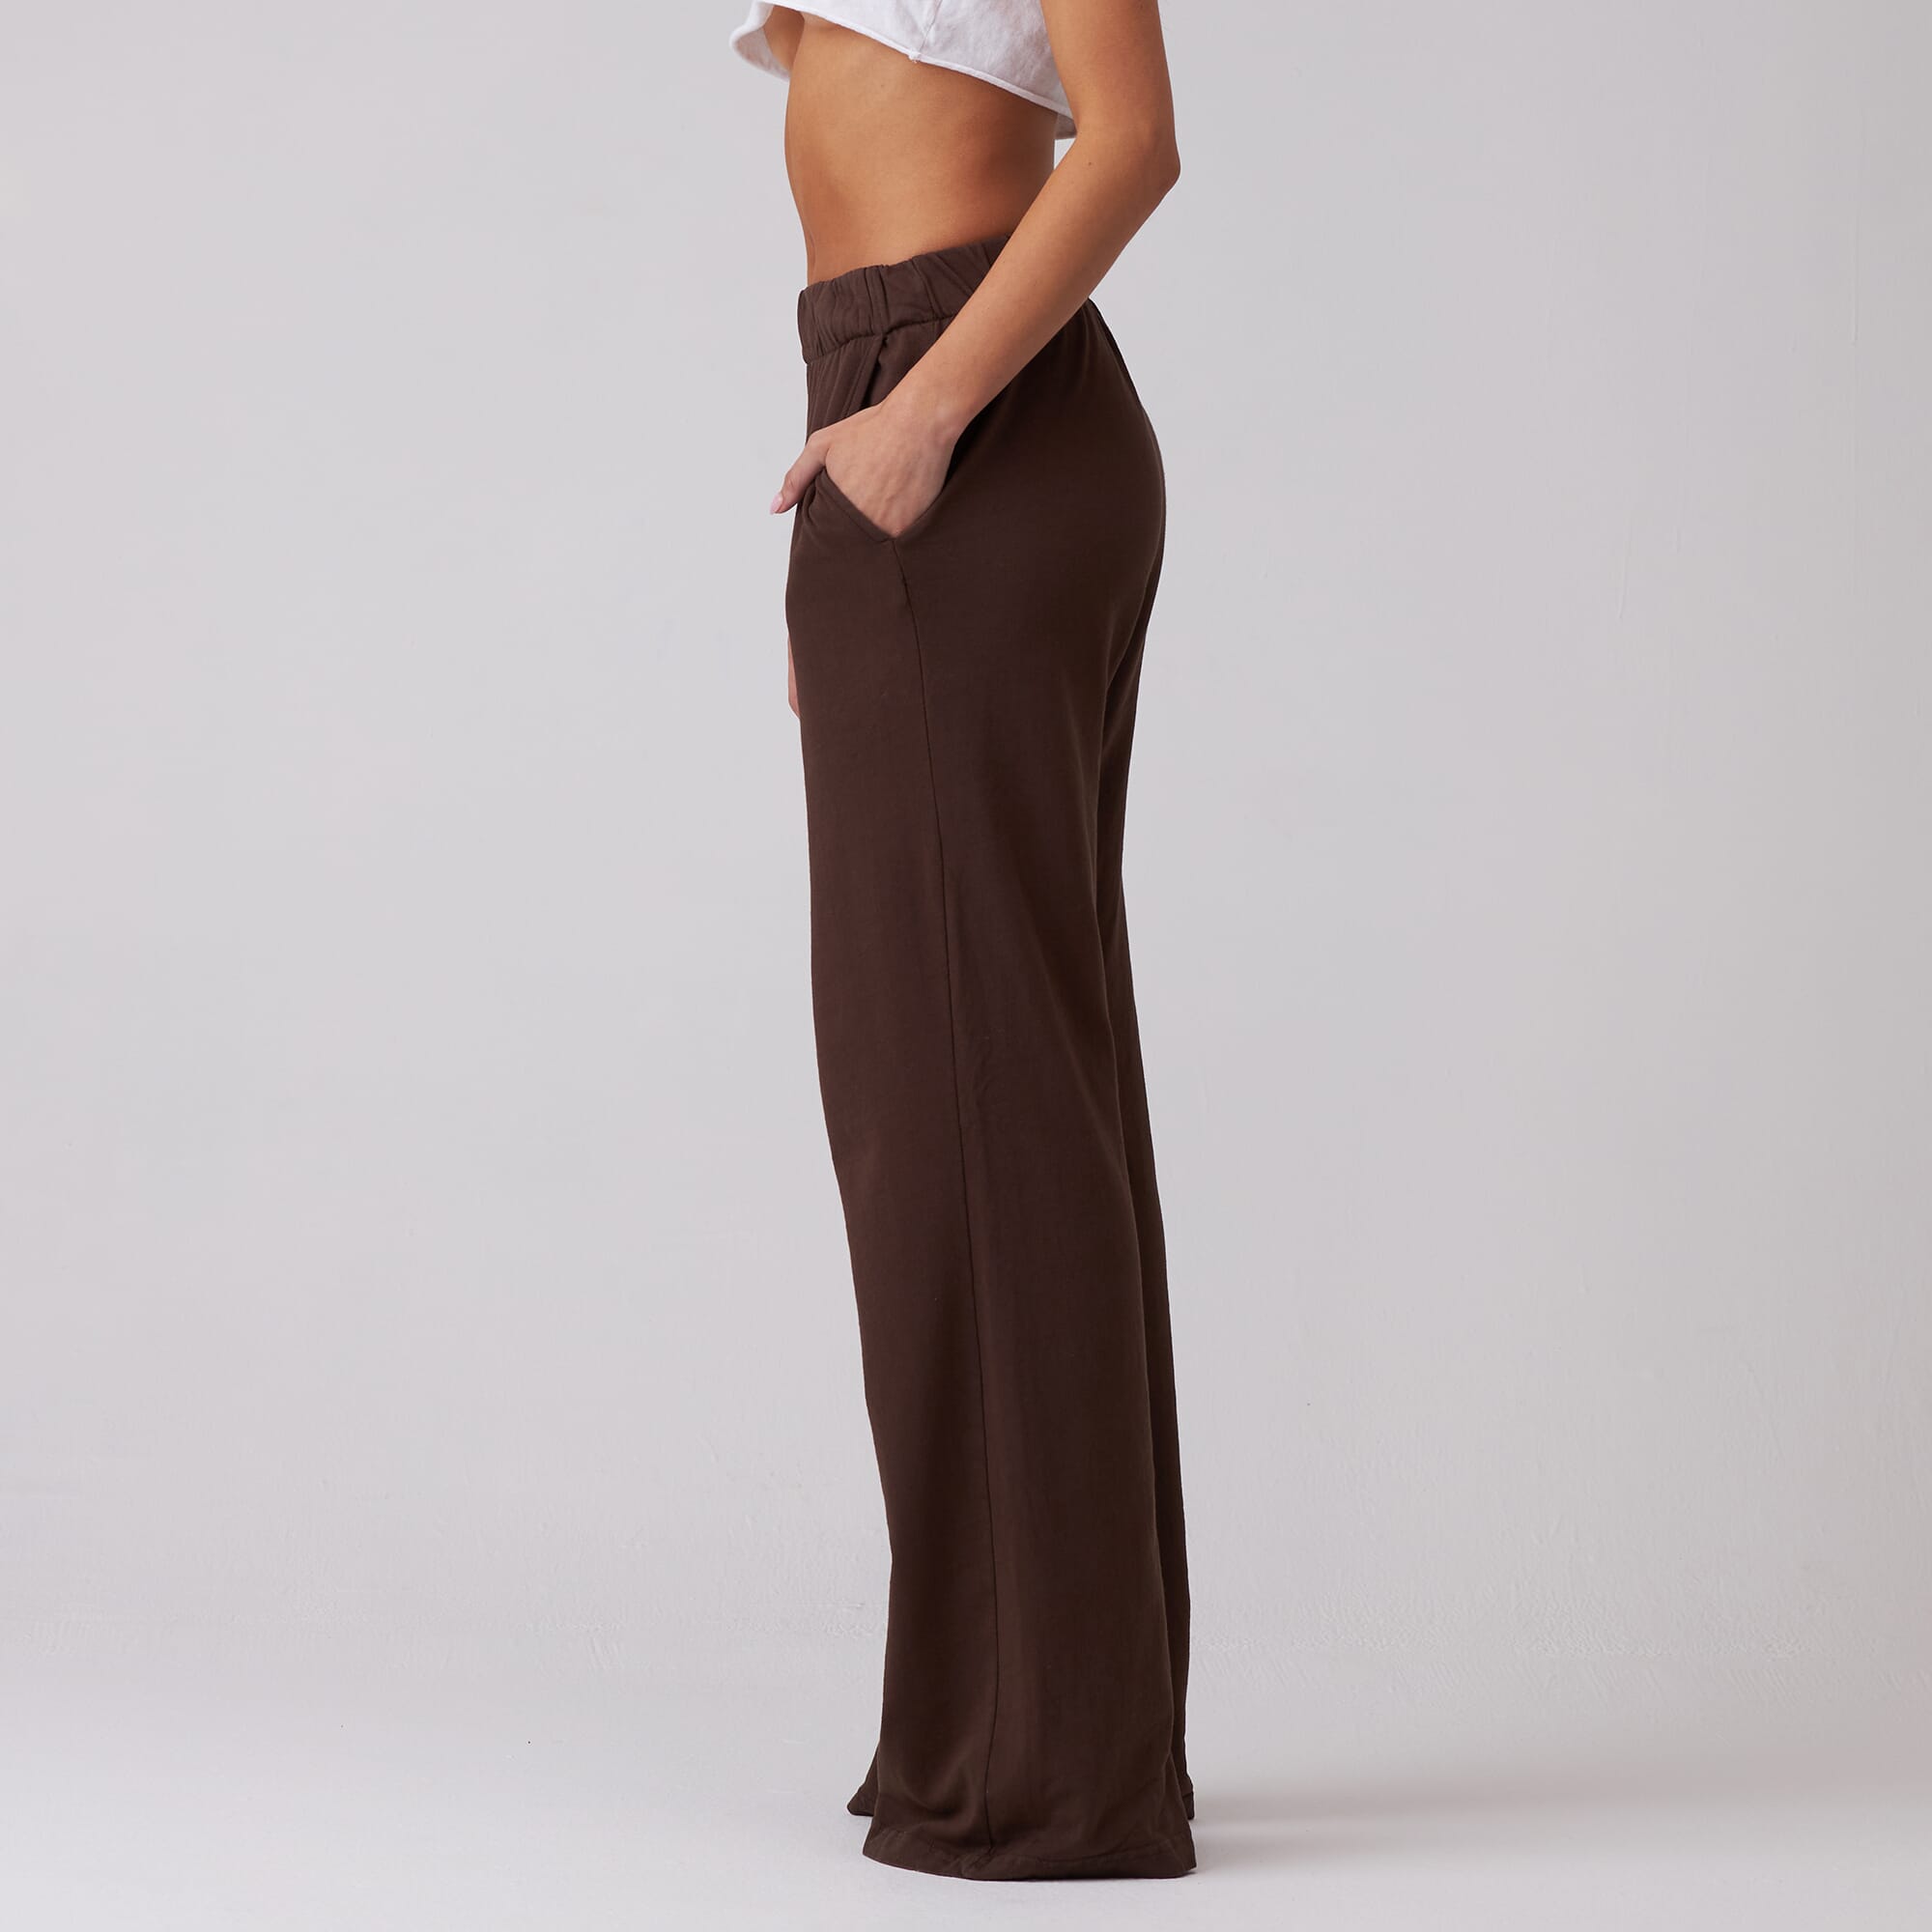 WOMENS FRENCH TERRY LOUNGE PANT